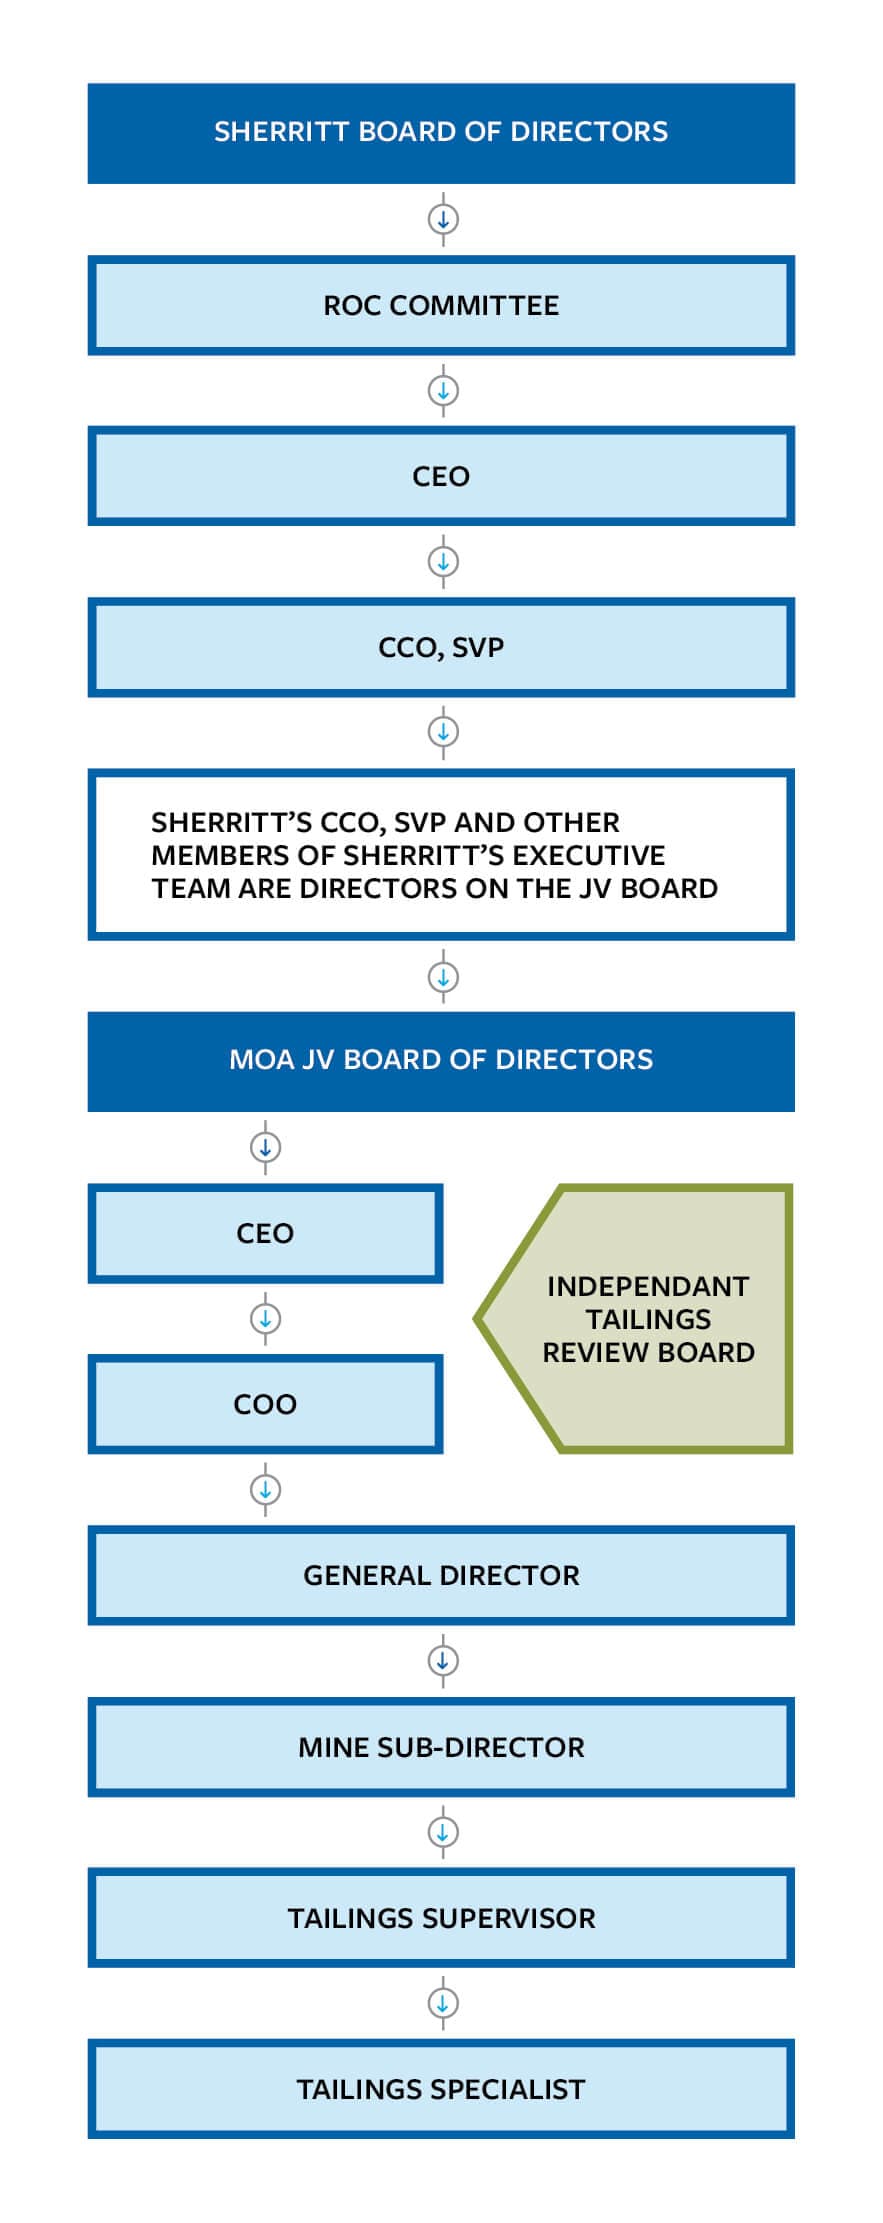 A graphic outlining Sherritt’s operating structure for addressing tailings management – involving the Sherritt Board of Directors and the Moa (Cuba) Joint Venture Board of Directors